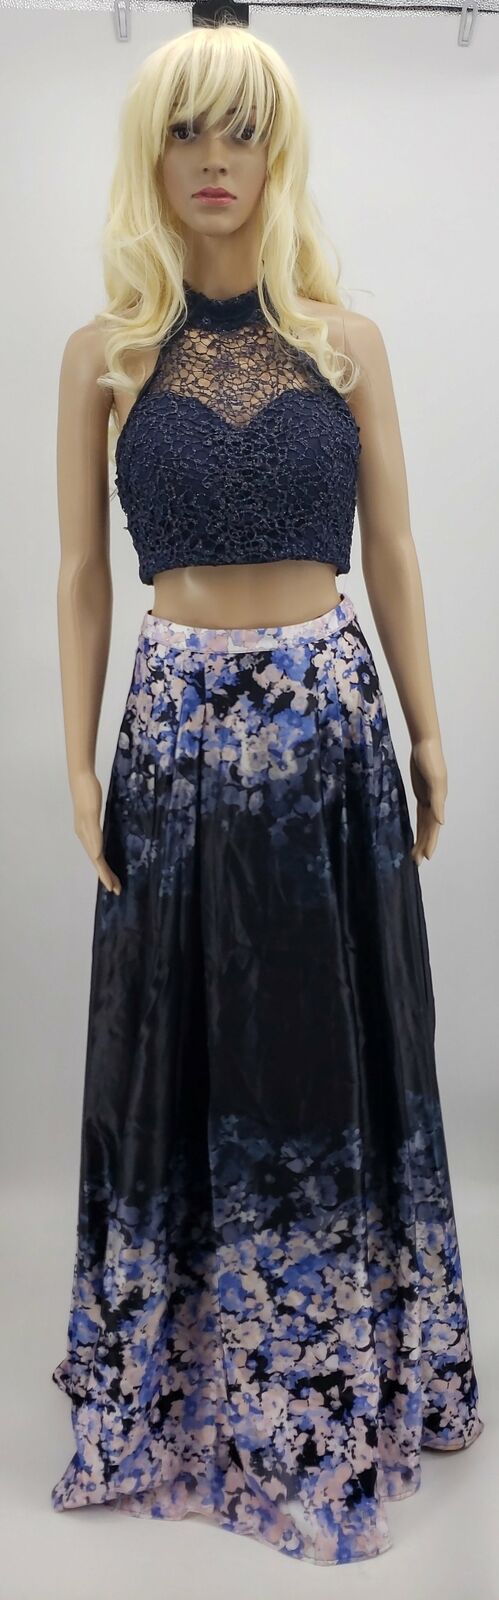 City Studios  2-Pc. Glitter Lace Top and Floral Skirt Navy, Juniors Size 7